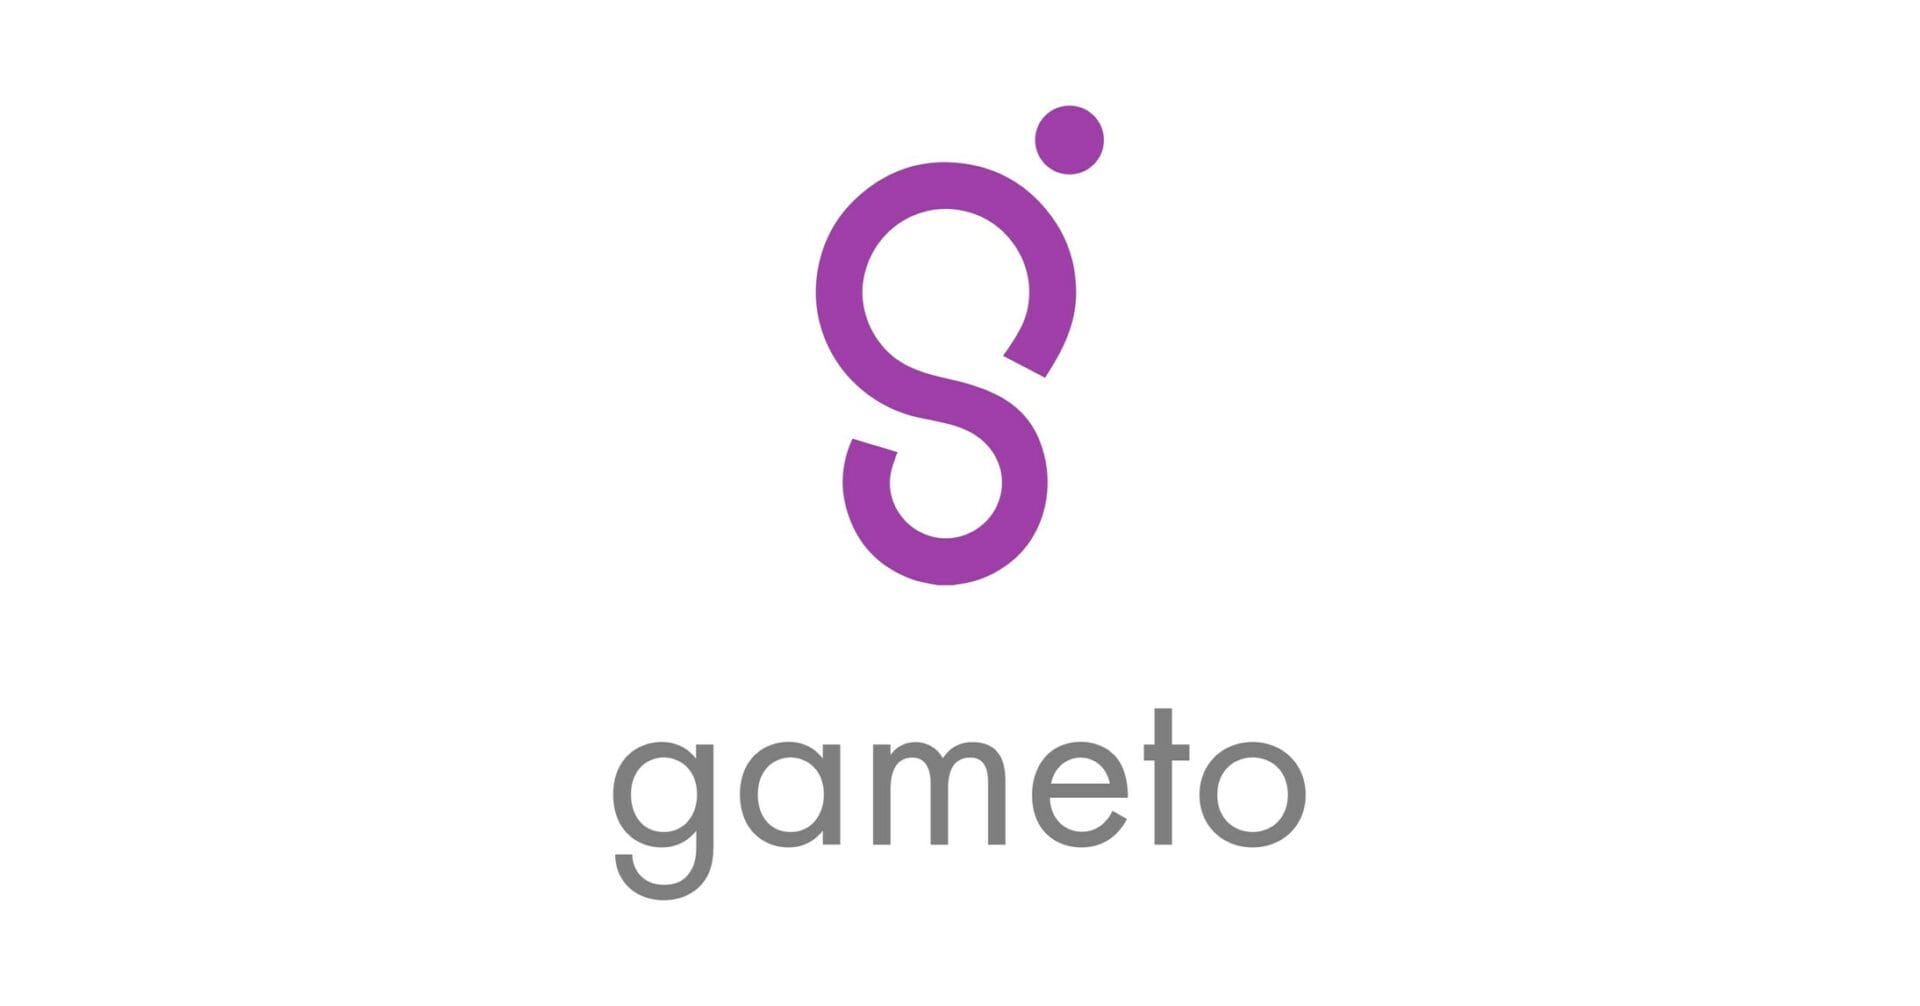 Gameto Announces Patient Experience Data Demonstrating Investigational In Vitro Maturation Solution Well Tolerated with Higher Patient Satisfaction Rates than Conventional Fertility Stimulation